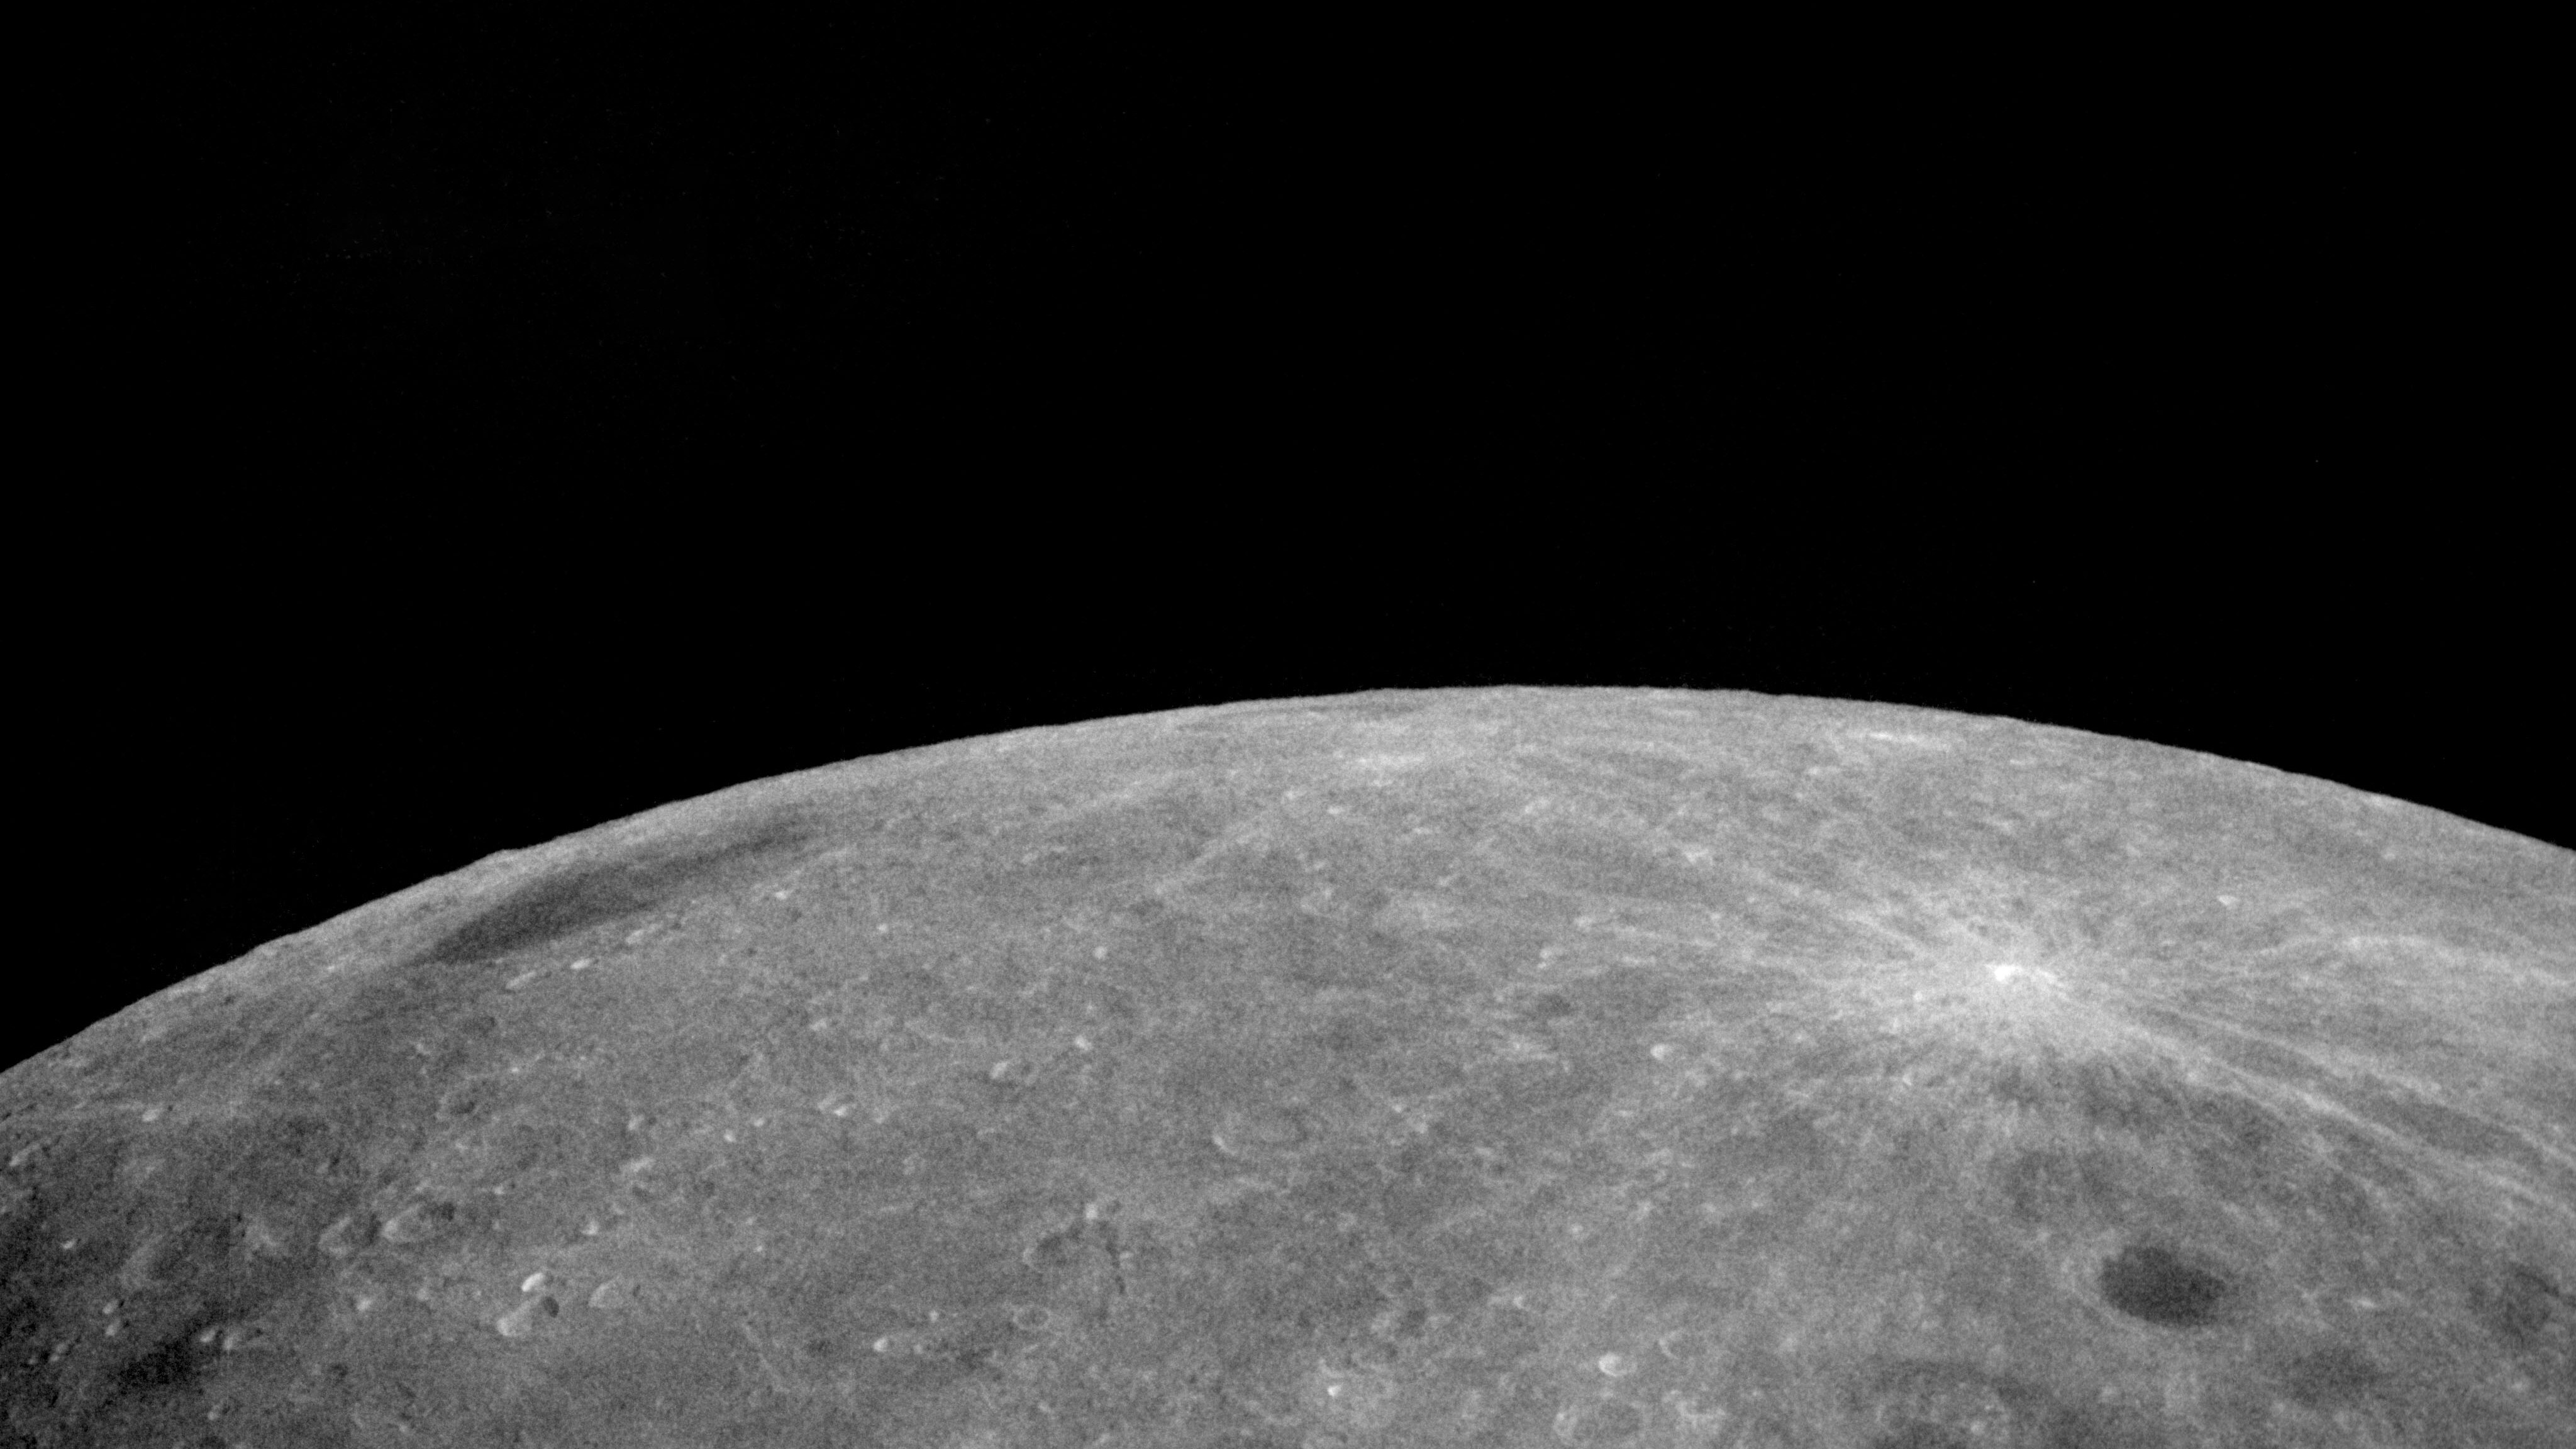 An extra moon may be orbiting Earth — and scientists think they 